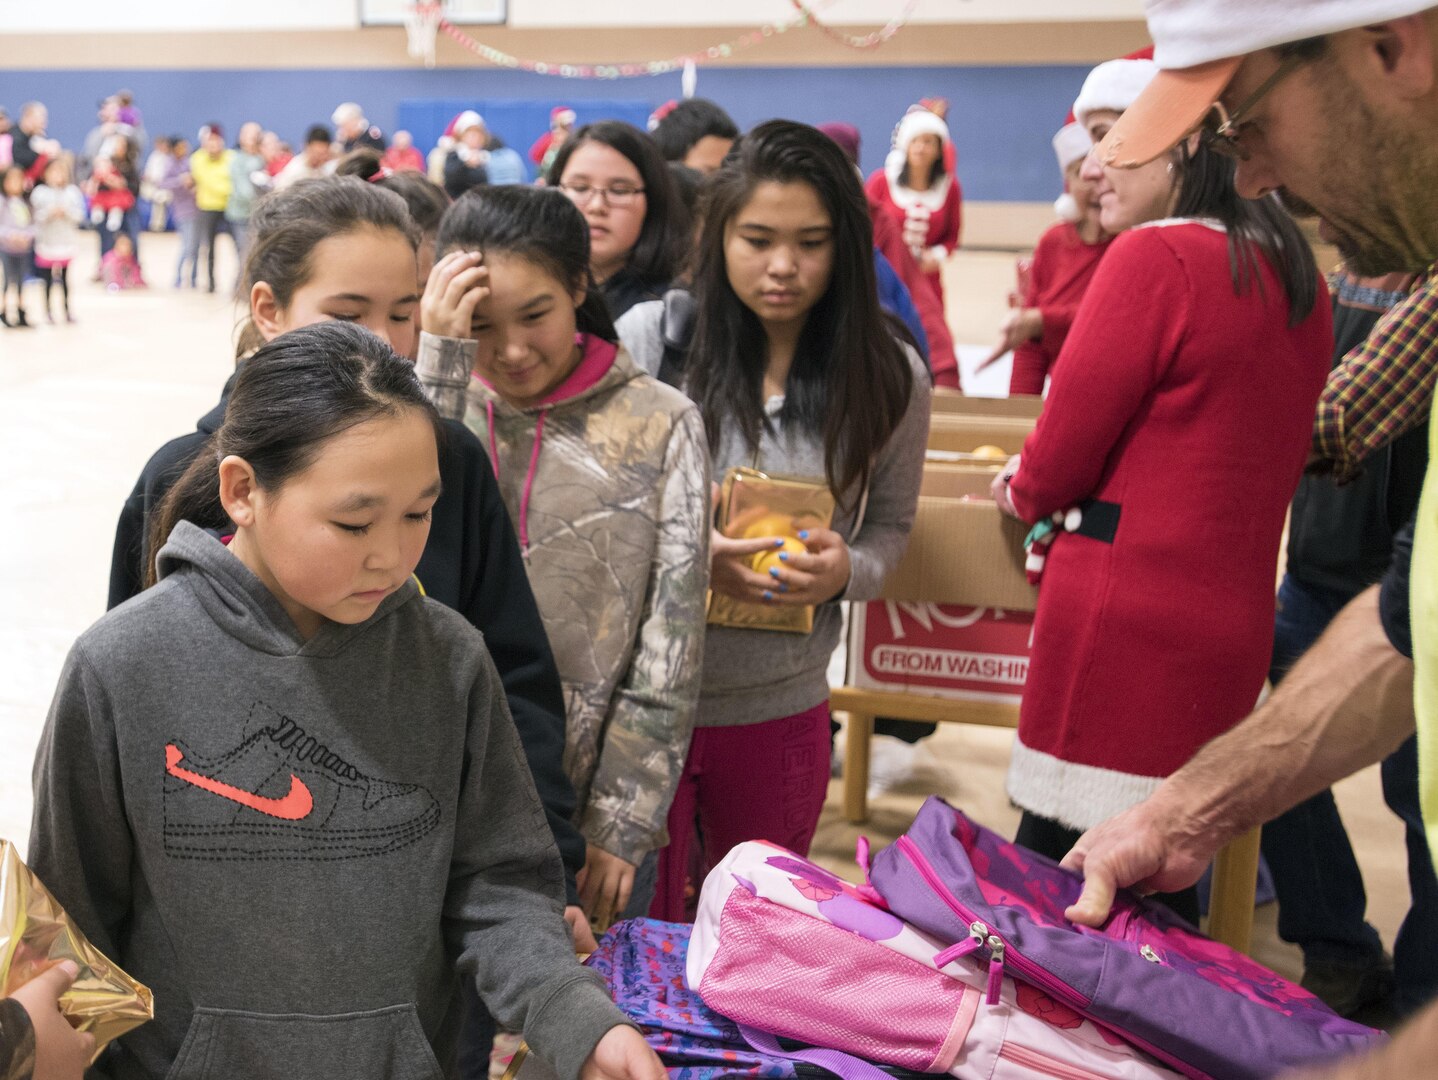 Togiak schoolgirls receive backpacks in the school gymnasium Nov. 15, 2016. Several donors were there as part of Operation Santa Claus, an Alaska National Guard-led program that delivers toys, school supplies and other gifts to children in Alaska's remote villages.